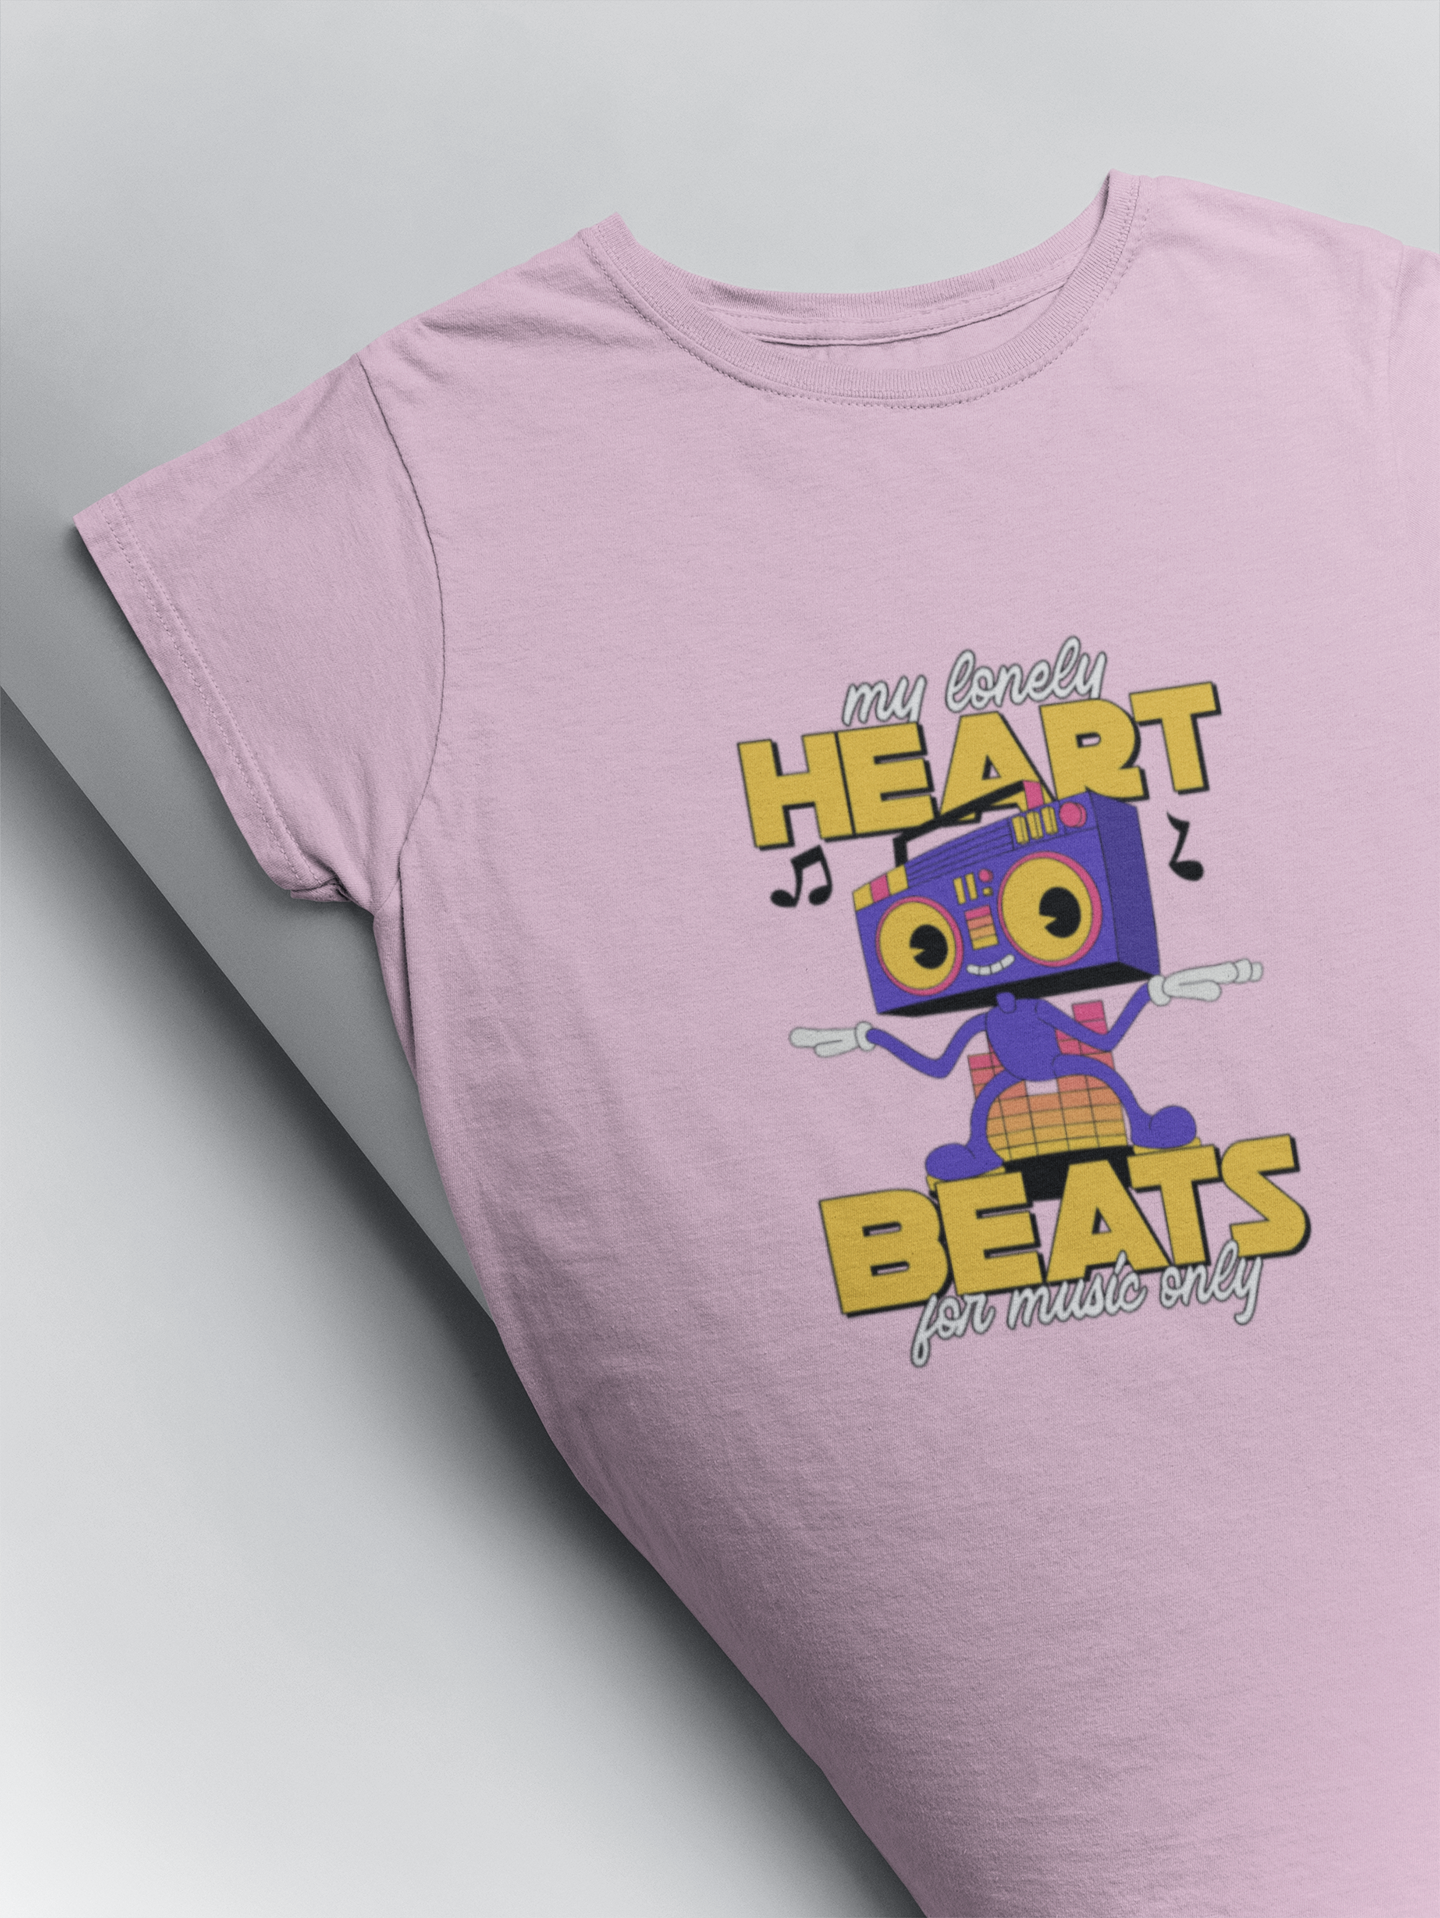 My heart beats for music only printed funny t shirts by Muselot in light pink colour 